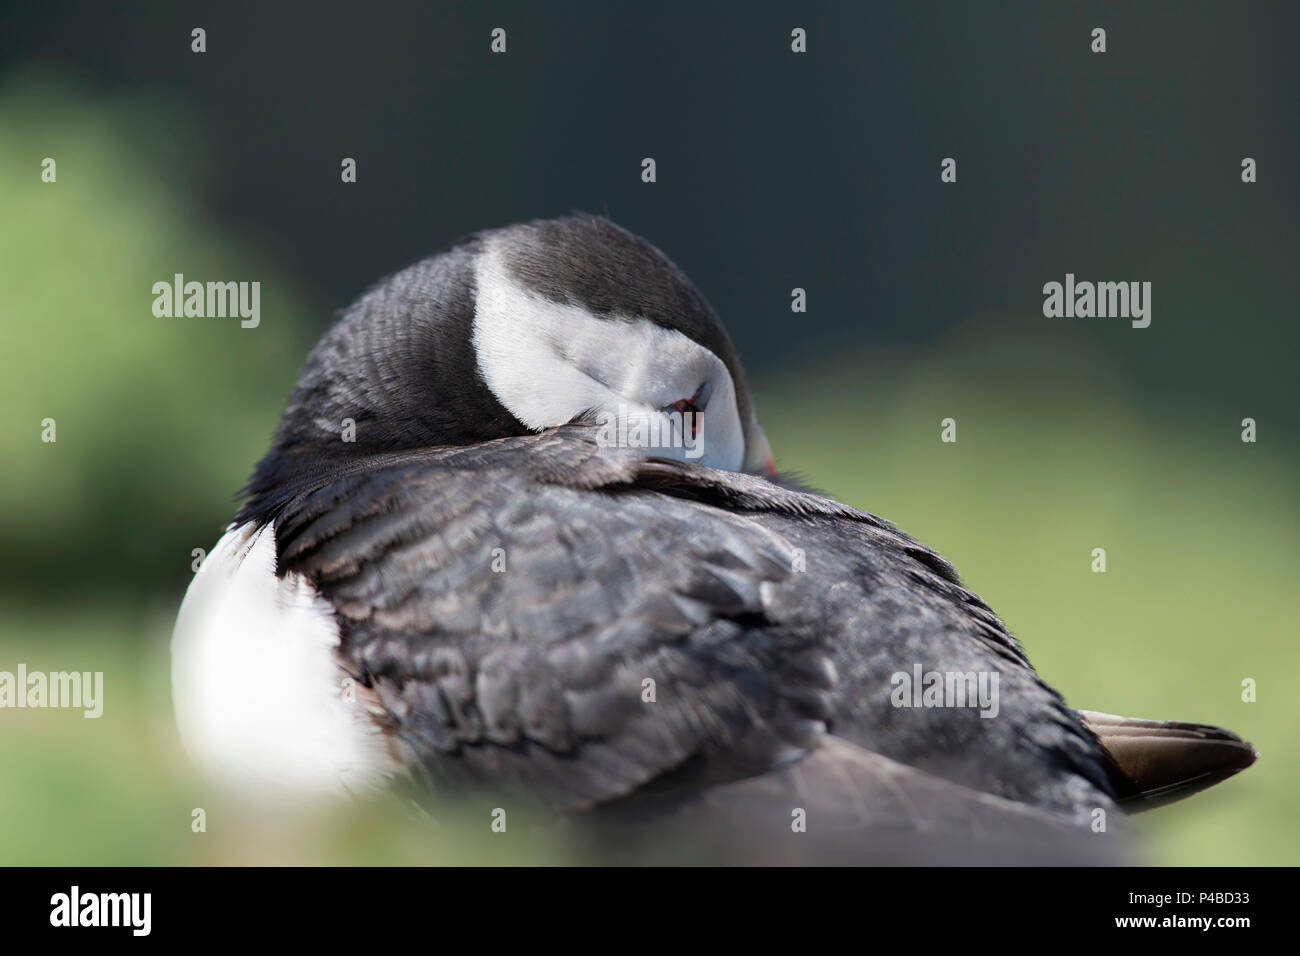 Puffin cute on Island surrounded by green foliage and sky Stock Photo